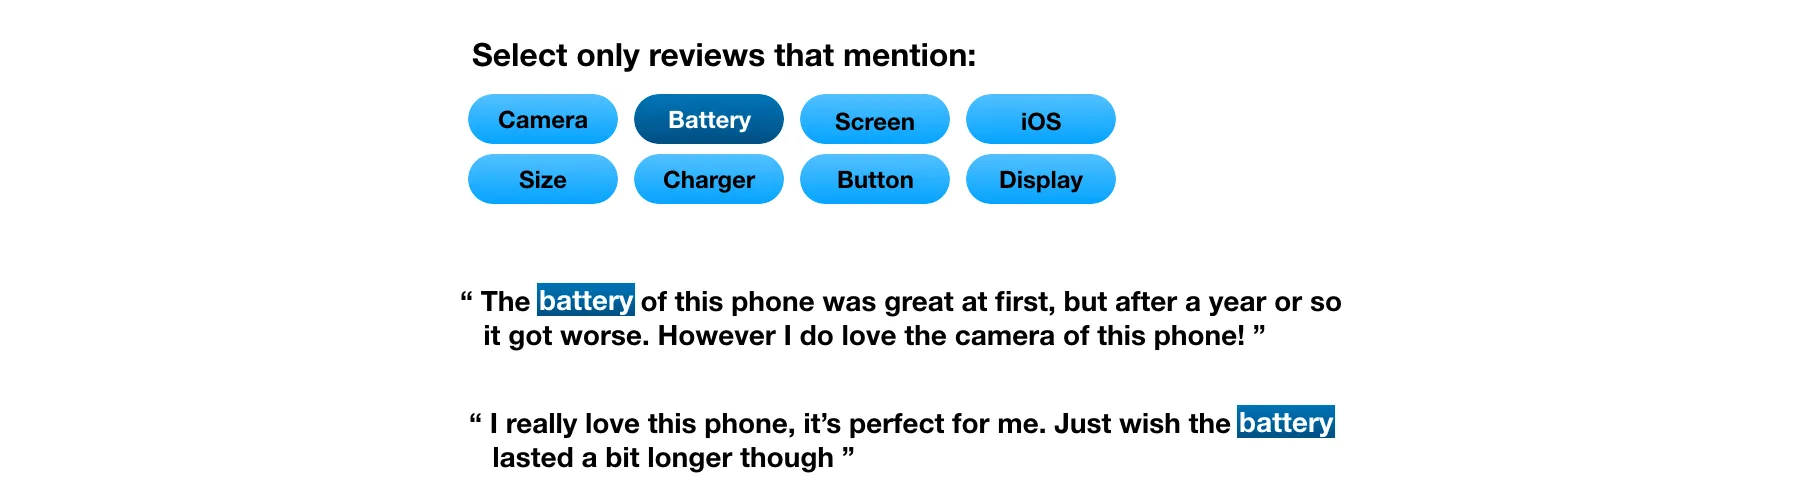 Read only the reviews mentioning the word "battery".